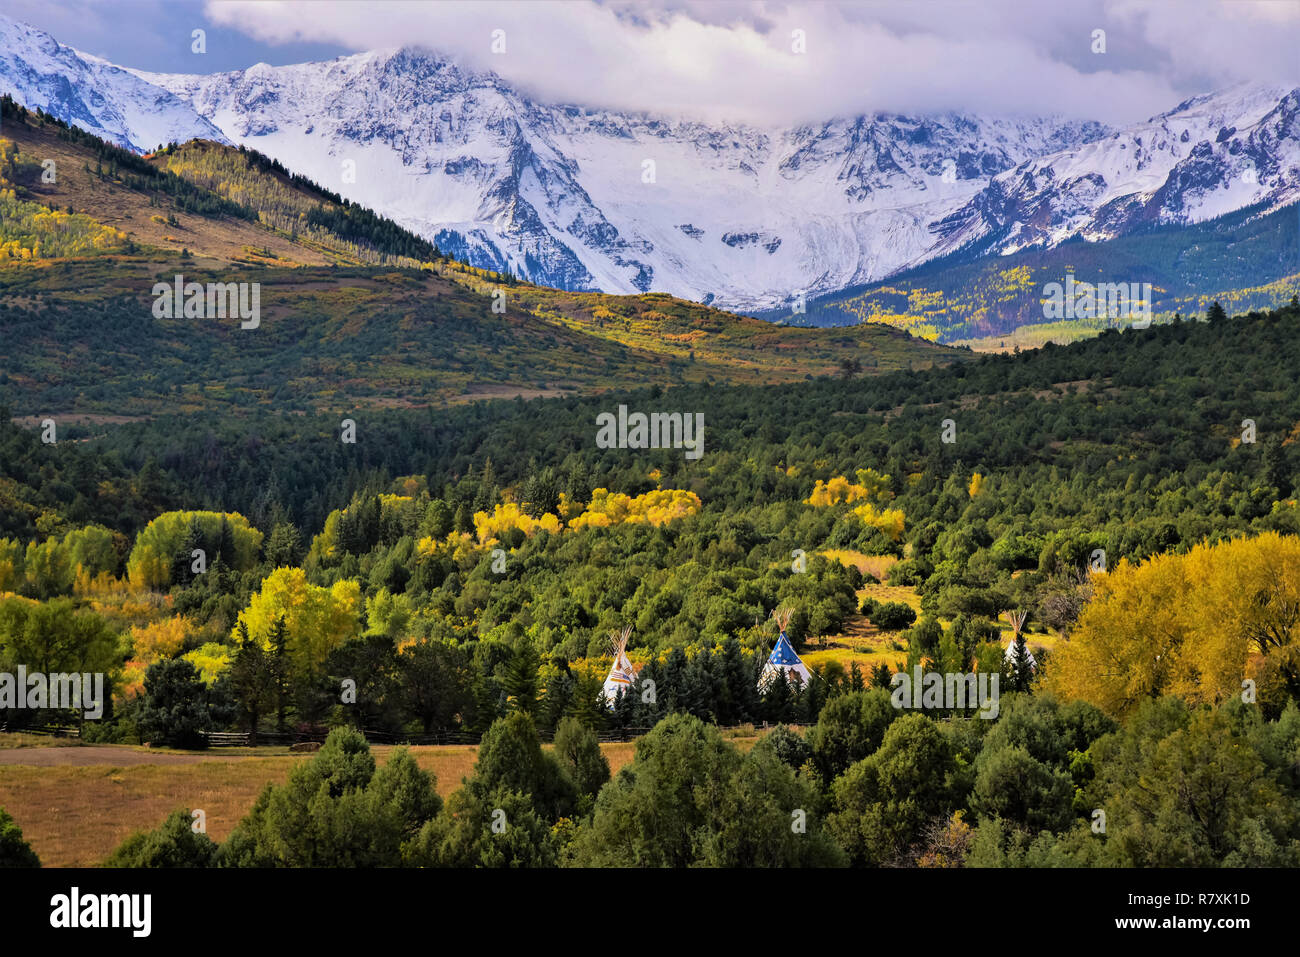 Mountain valley scenic with San Juan Mtns. in background. Stock Photo